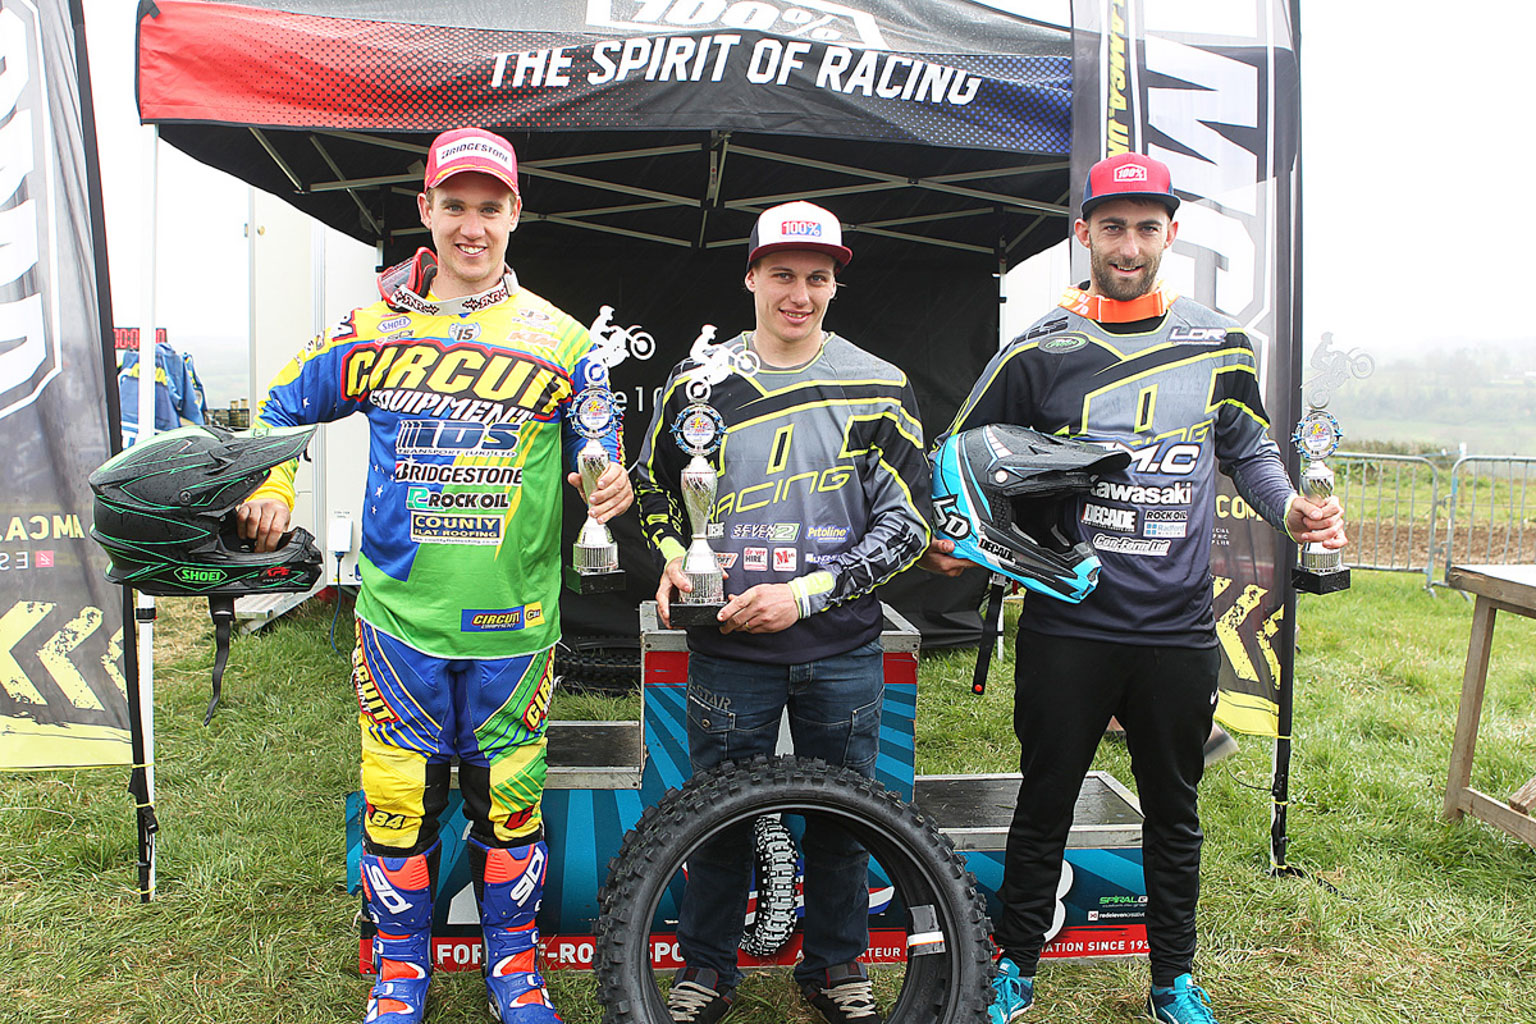 MX2 podium with left to right, Josh Waterman(2nd), Luke Dean, winner and Lewis King(3rd)